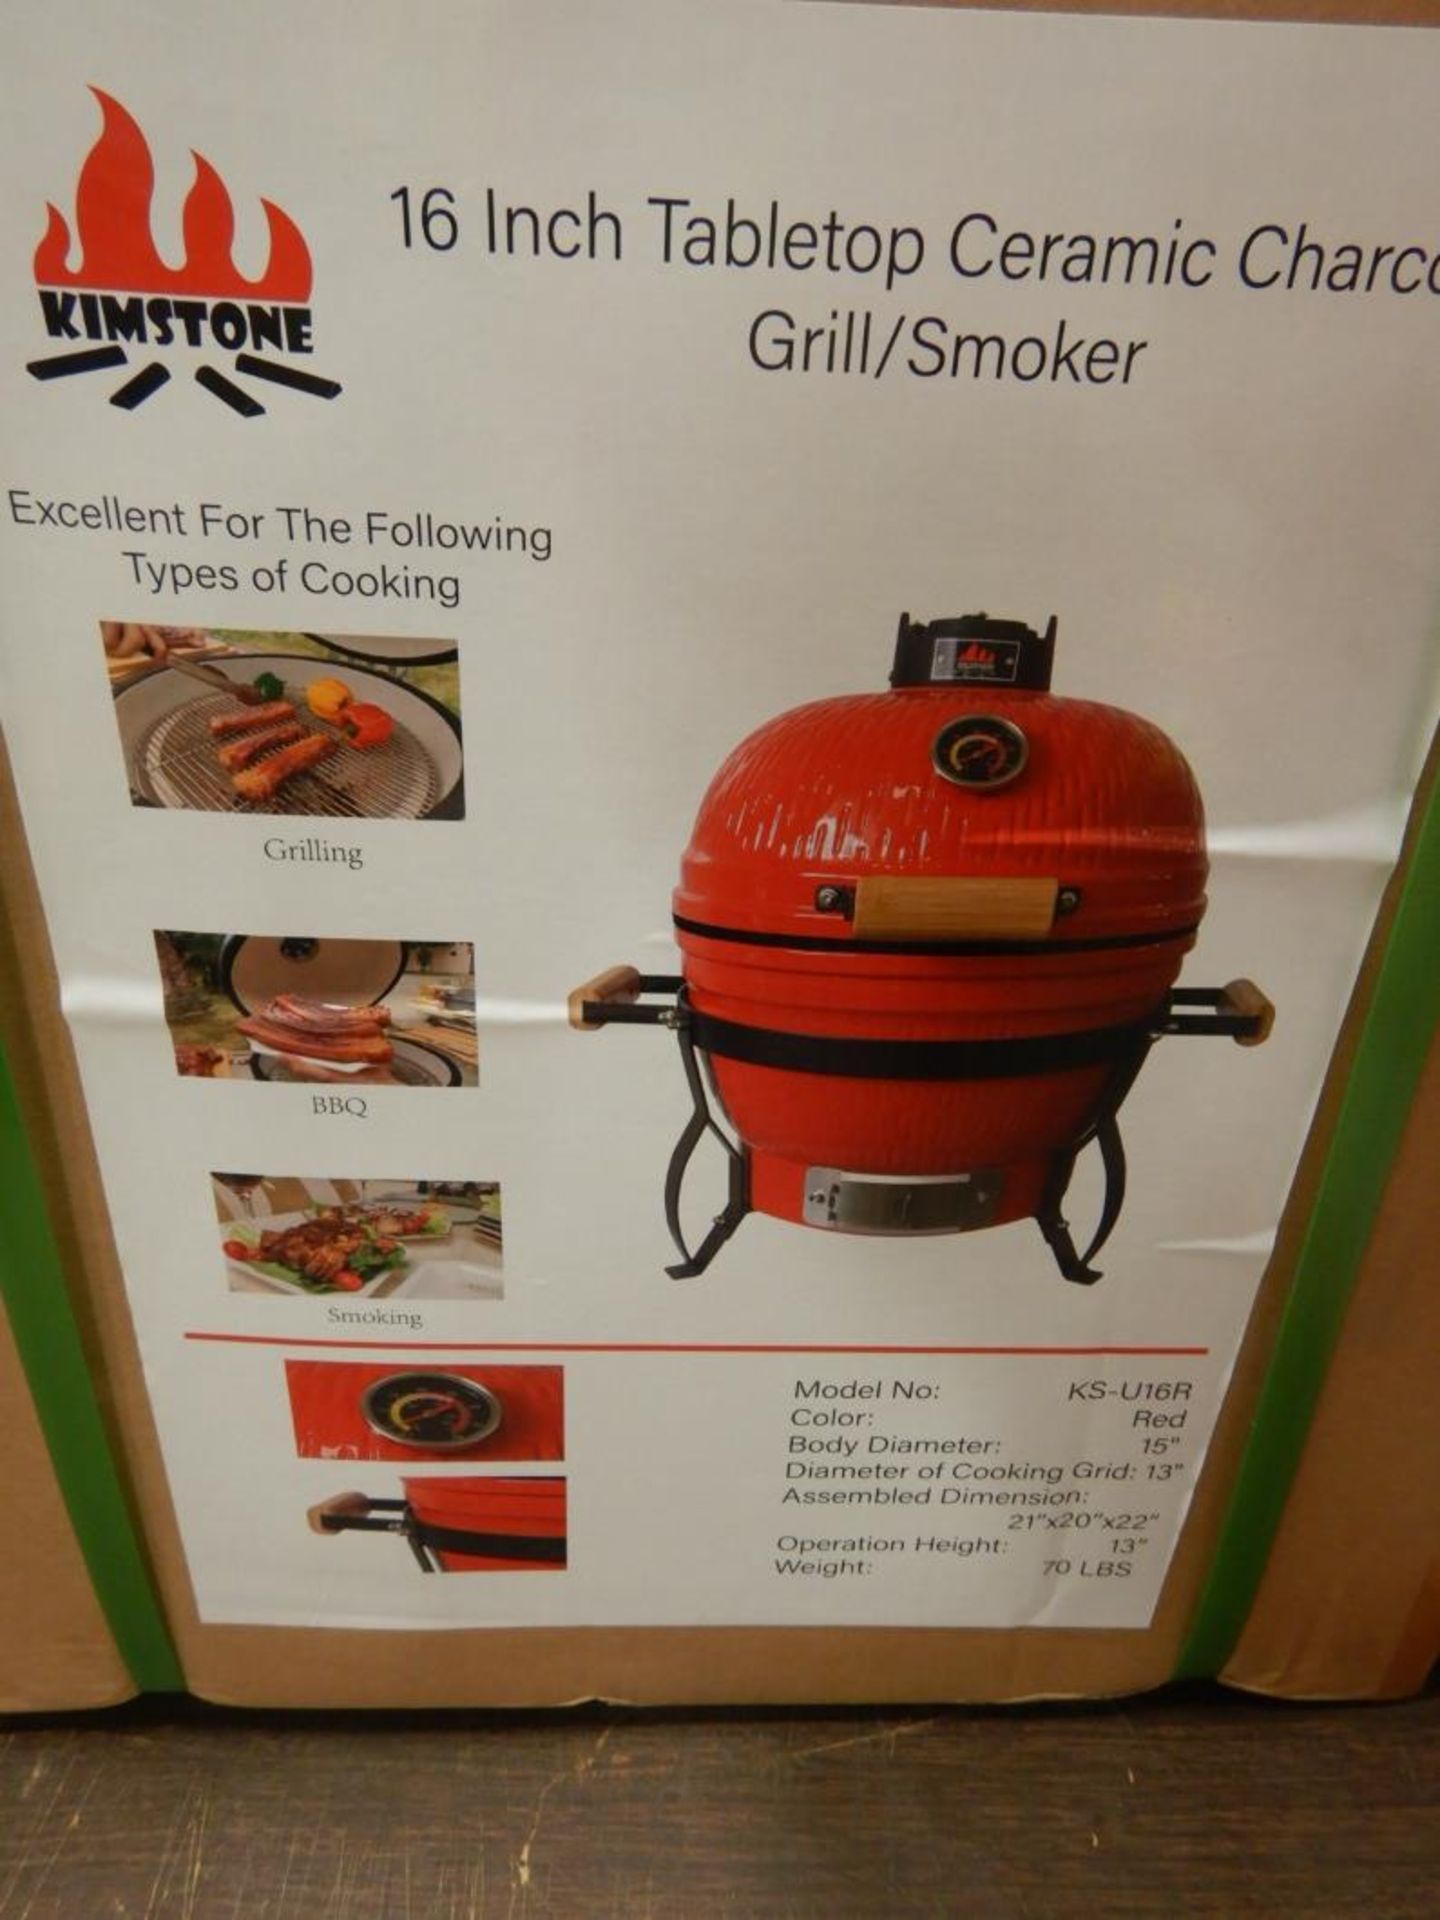 KIMSTONE 16" TABLETOP CHARCOAL GRILL/SMAOKER - Image 2 of 2